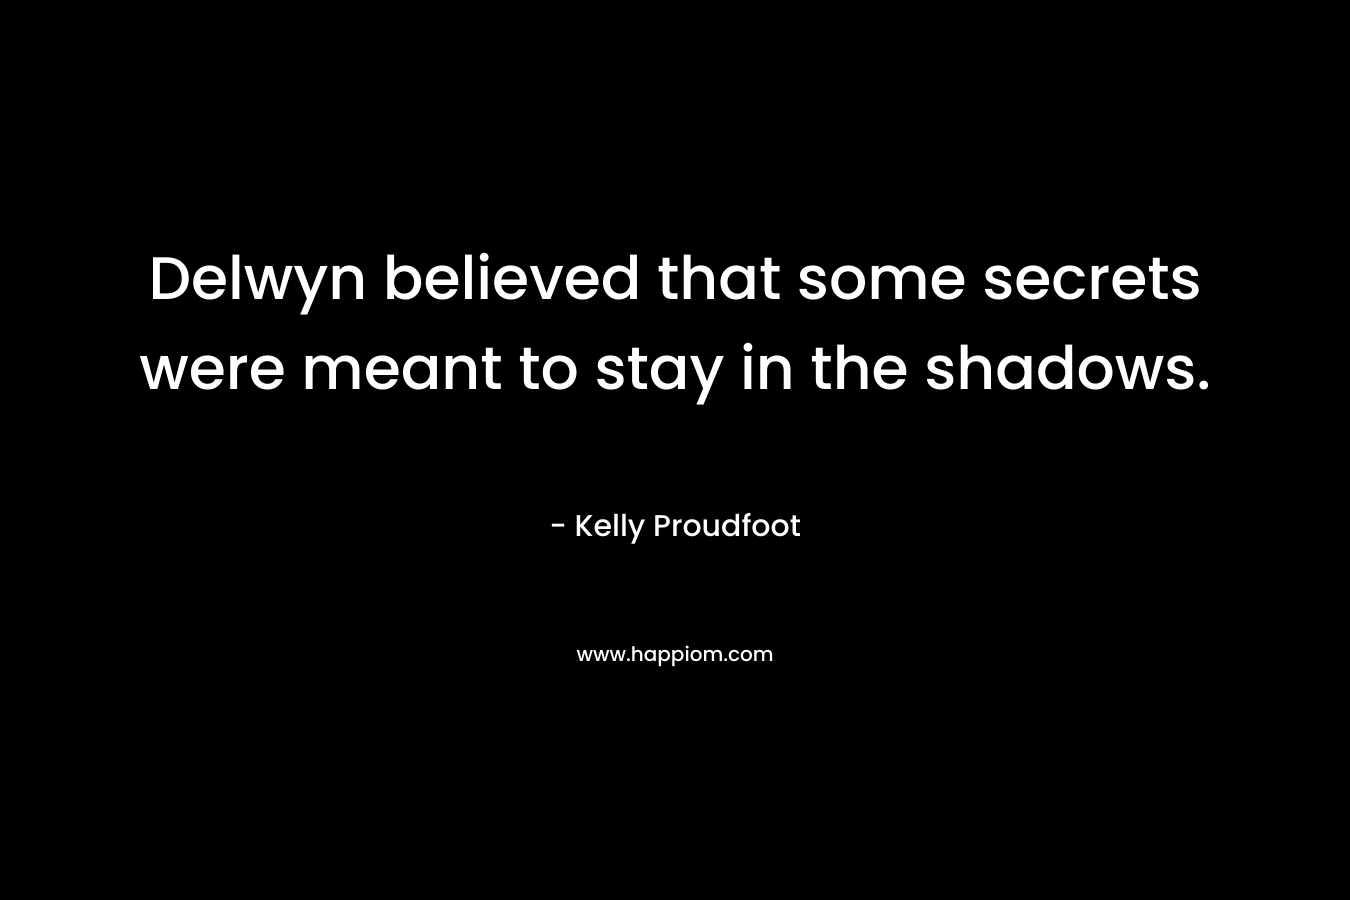 Delwyn believed that some secrets were meant to stay in the shadows.